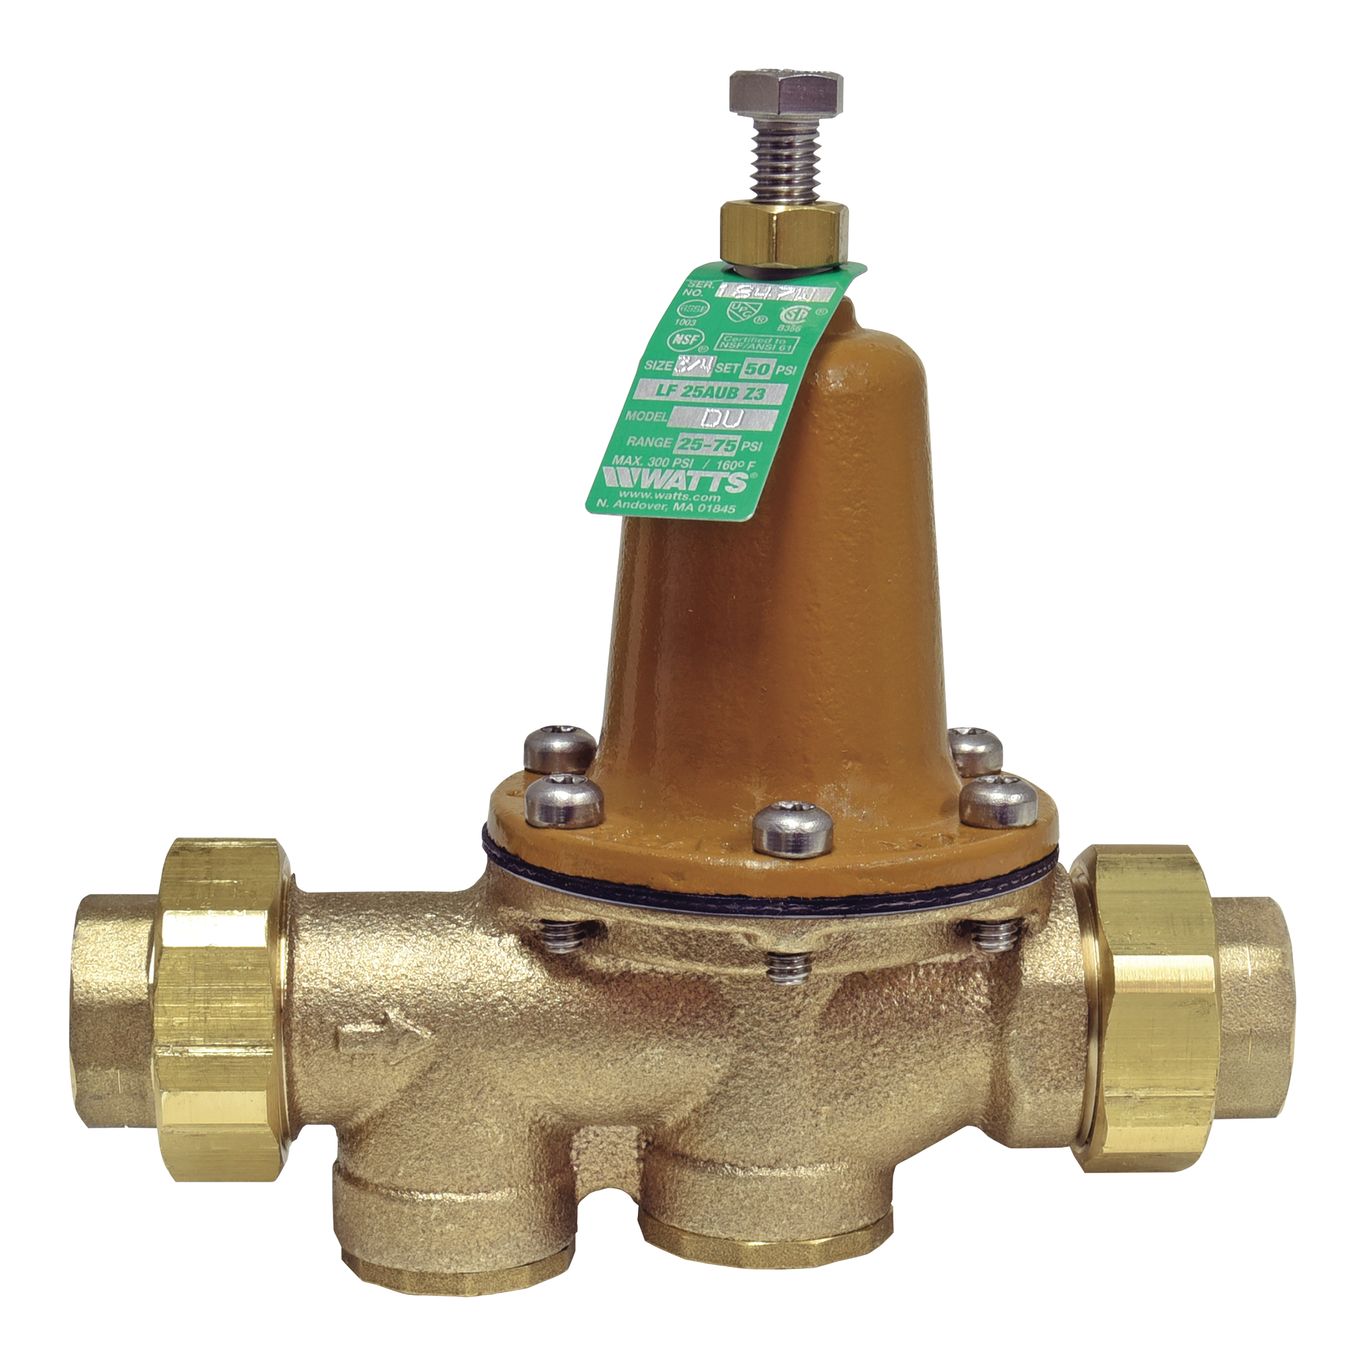 0009258 - 3/4 In Lead Free Water Pressure Reducing Valve, Double Union, Npt Female, Polymer Seat, Adjustable 25-75 psi